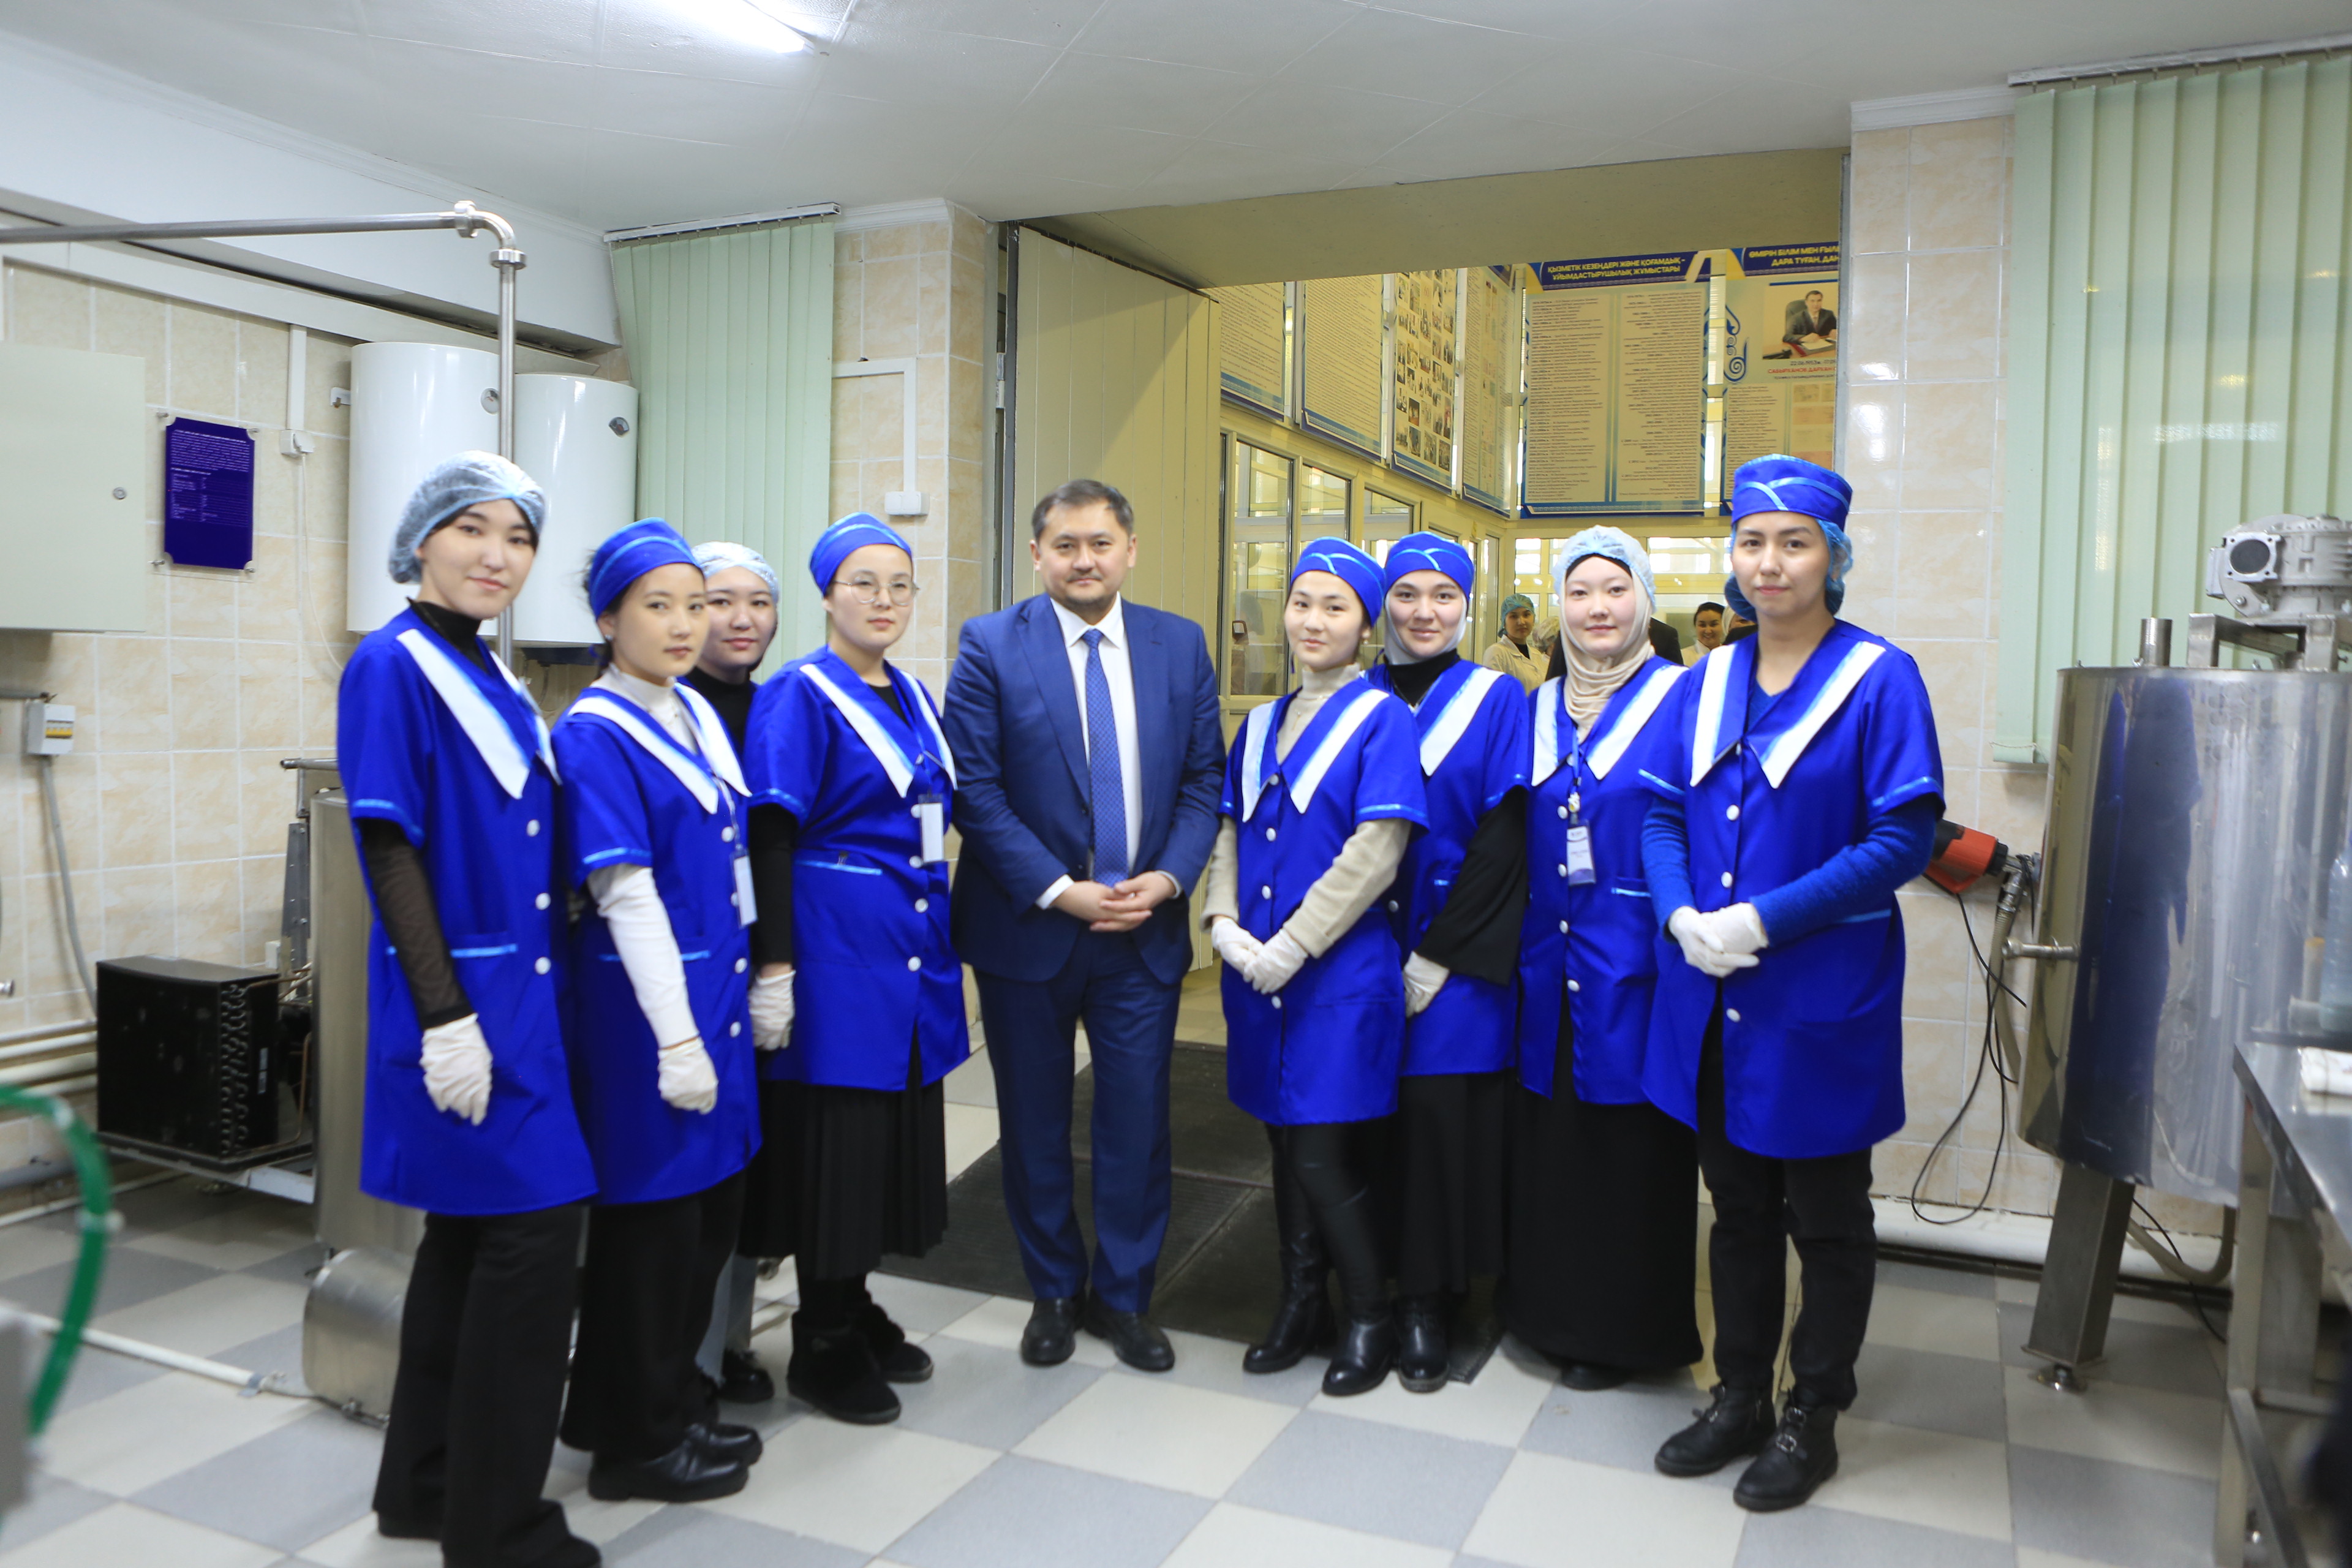 Minister of Science and Higher Education of the Republic of Kazakhstan Sayasat Nurbek got acquainted with the educational and industrial laboratory of the Higher School of Textile and Food Engineering of the M. Auezov SKU educational Institution